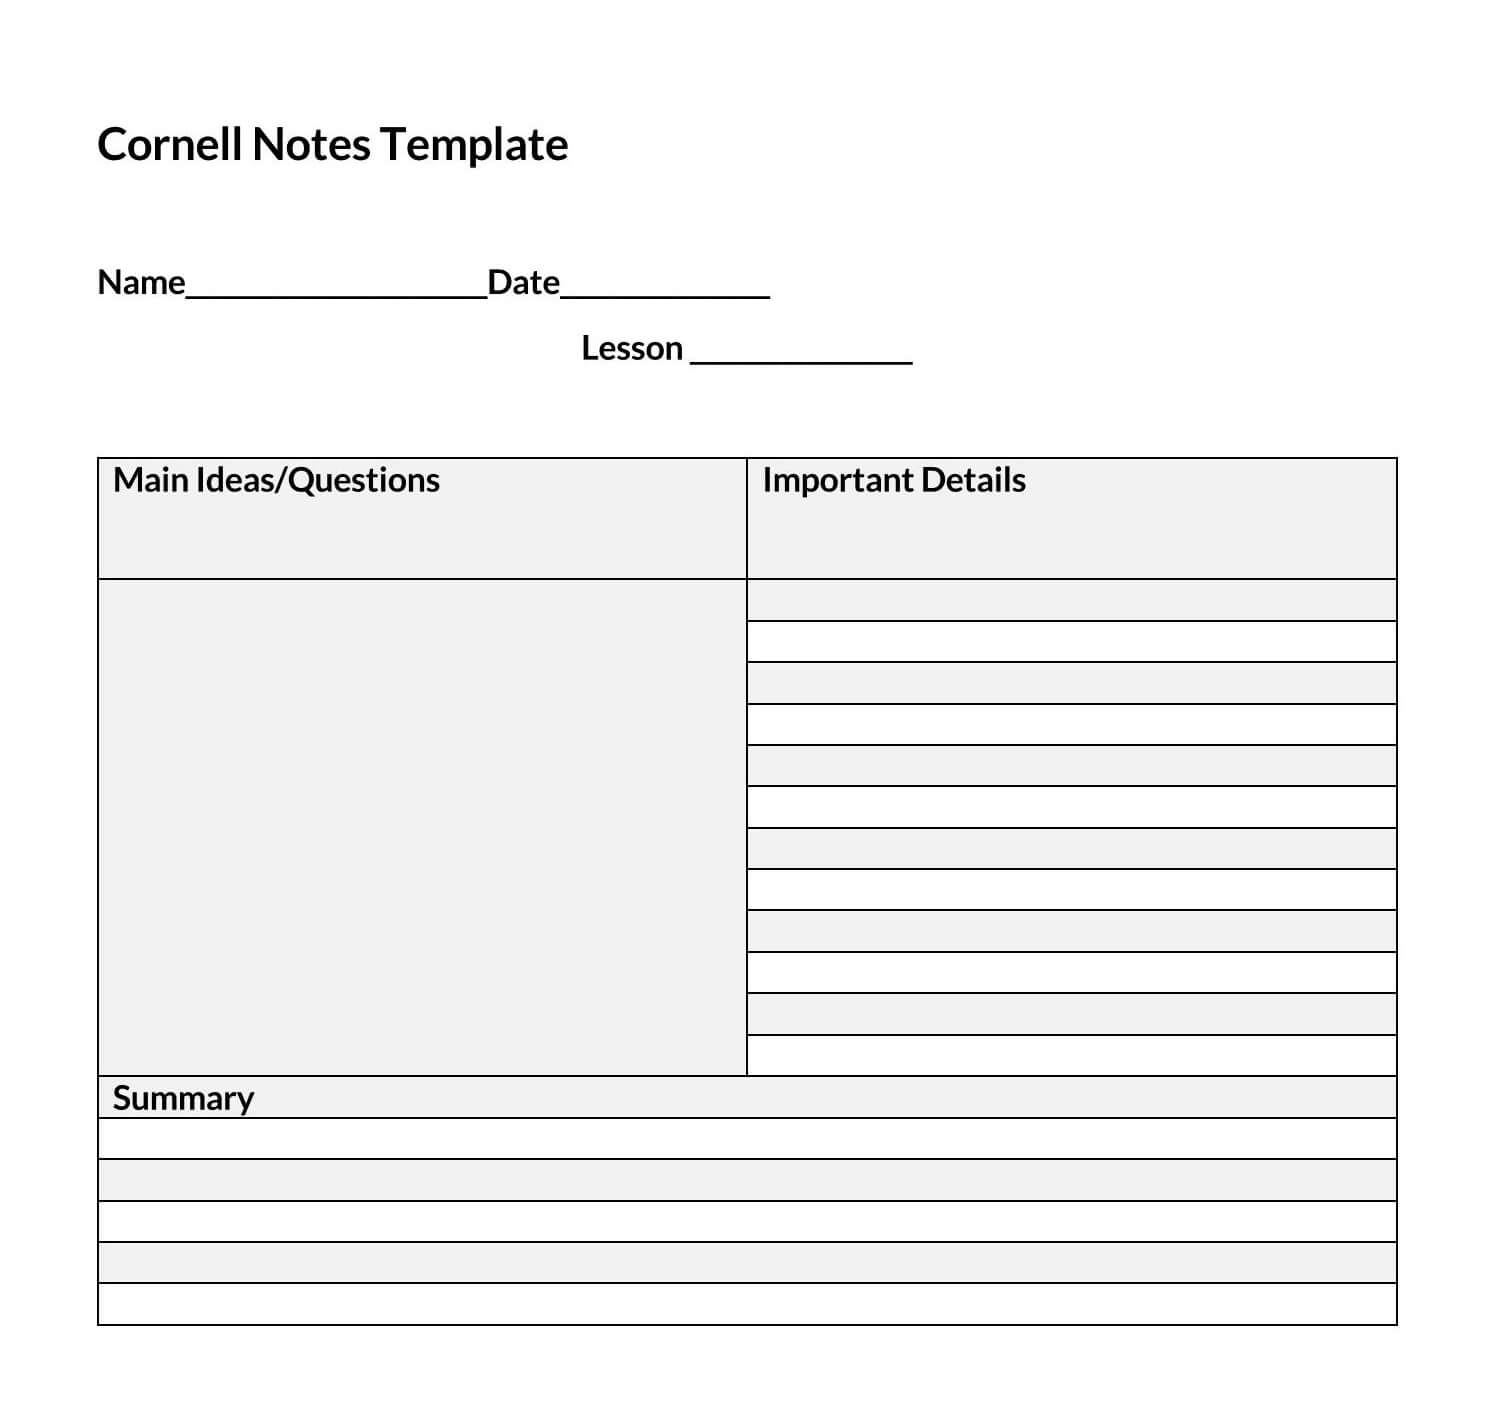 Professional Cornell Note Sample Download